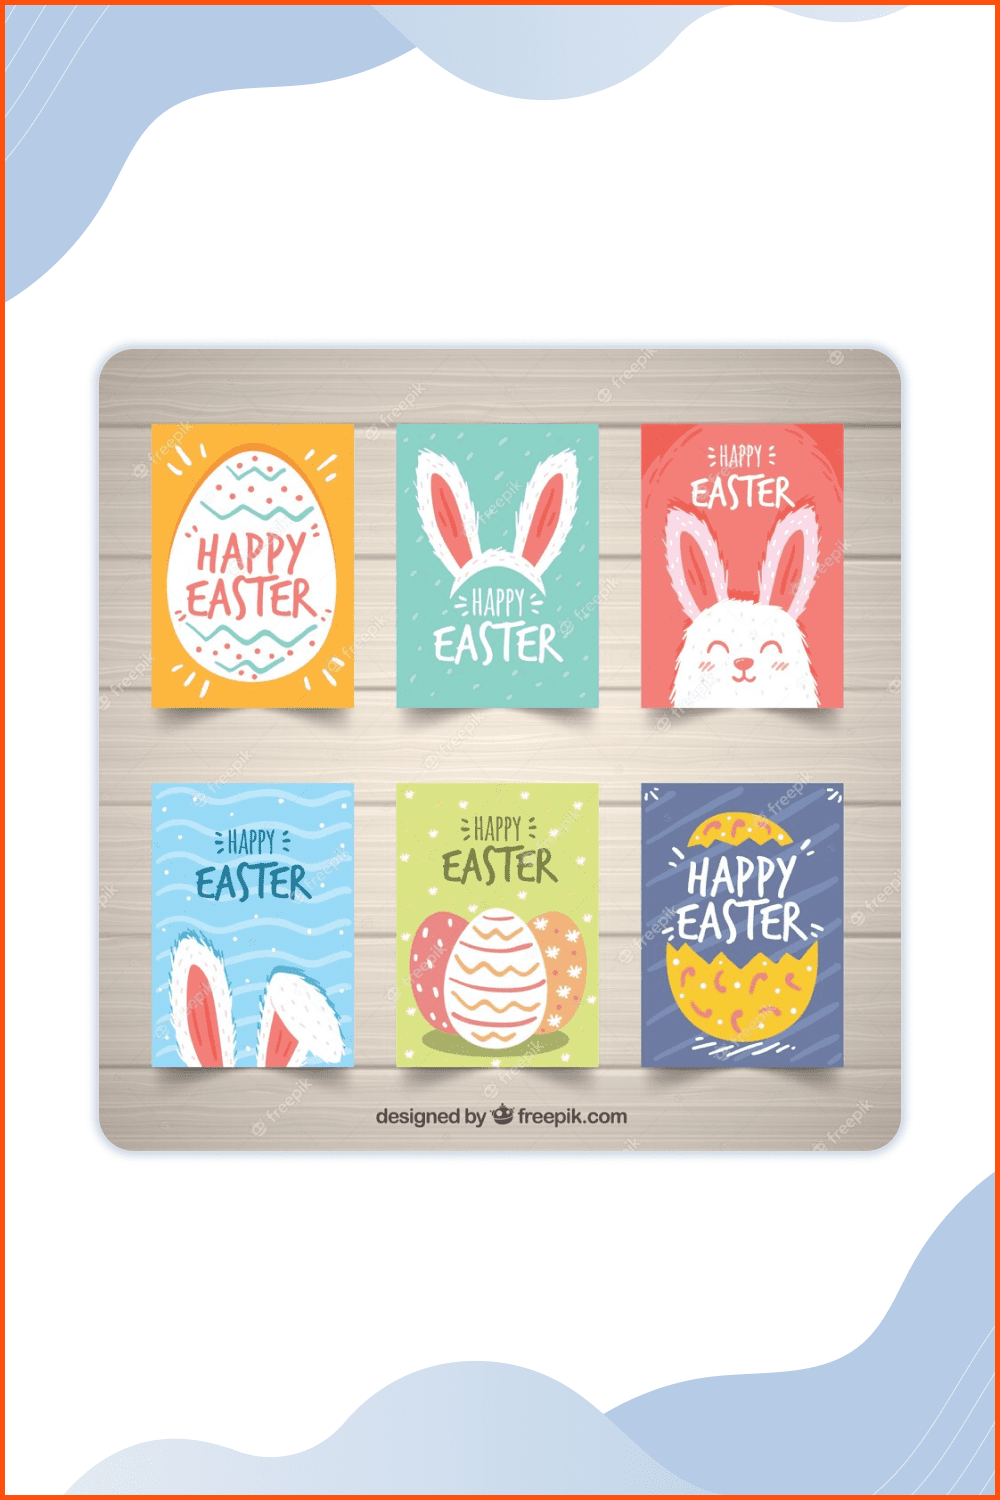 Easter day cards hand drawn style.